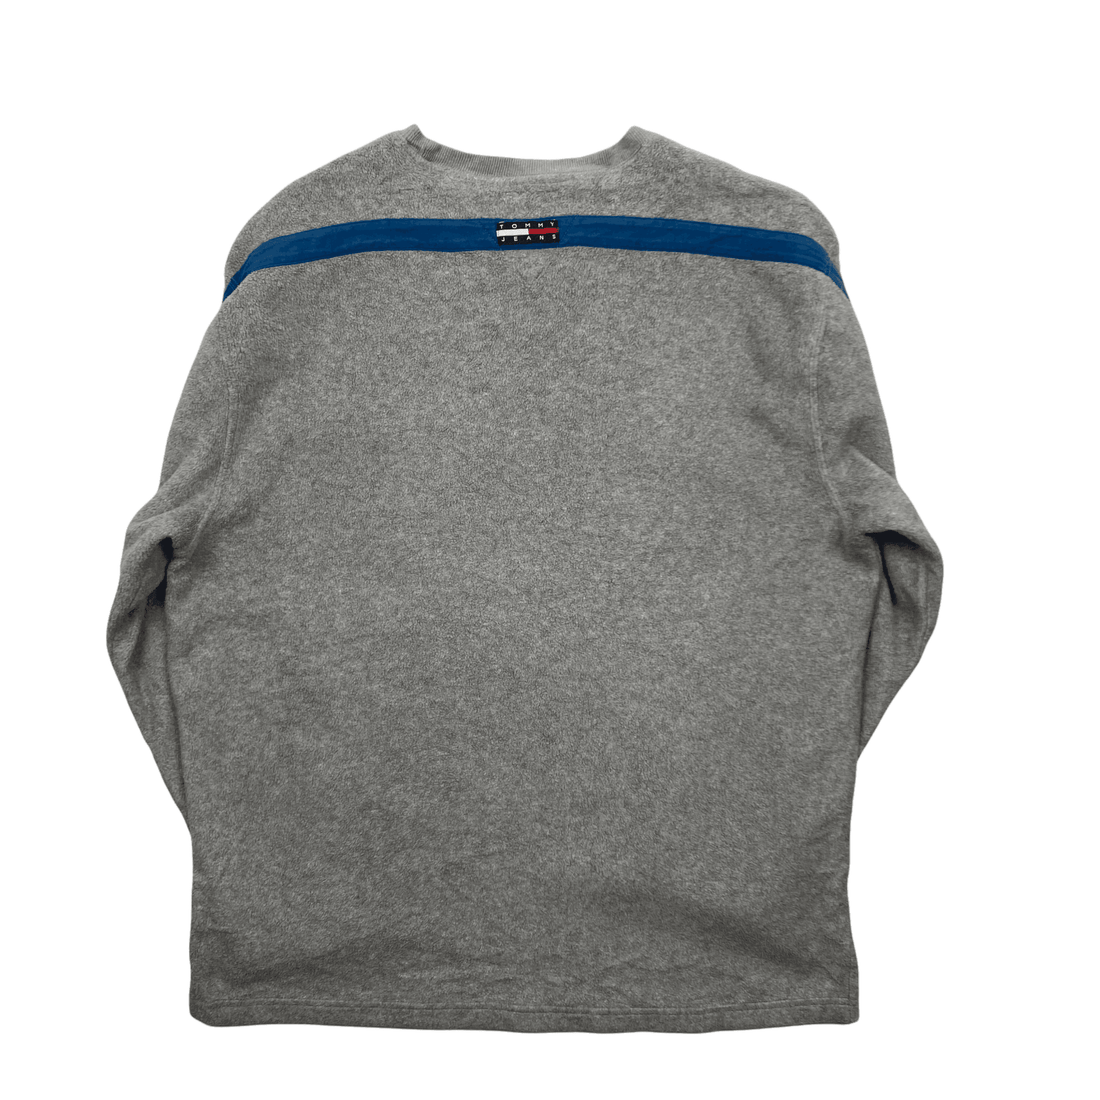 Vintage 90s Grey + Blue Tommy Hilfiger Spell-Out Fleece Sweatshirt - Extra Large (Recommended Size - Large) - The Streetwear Studio